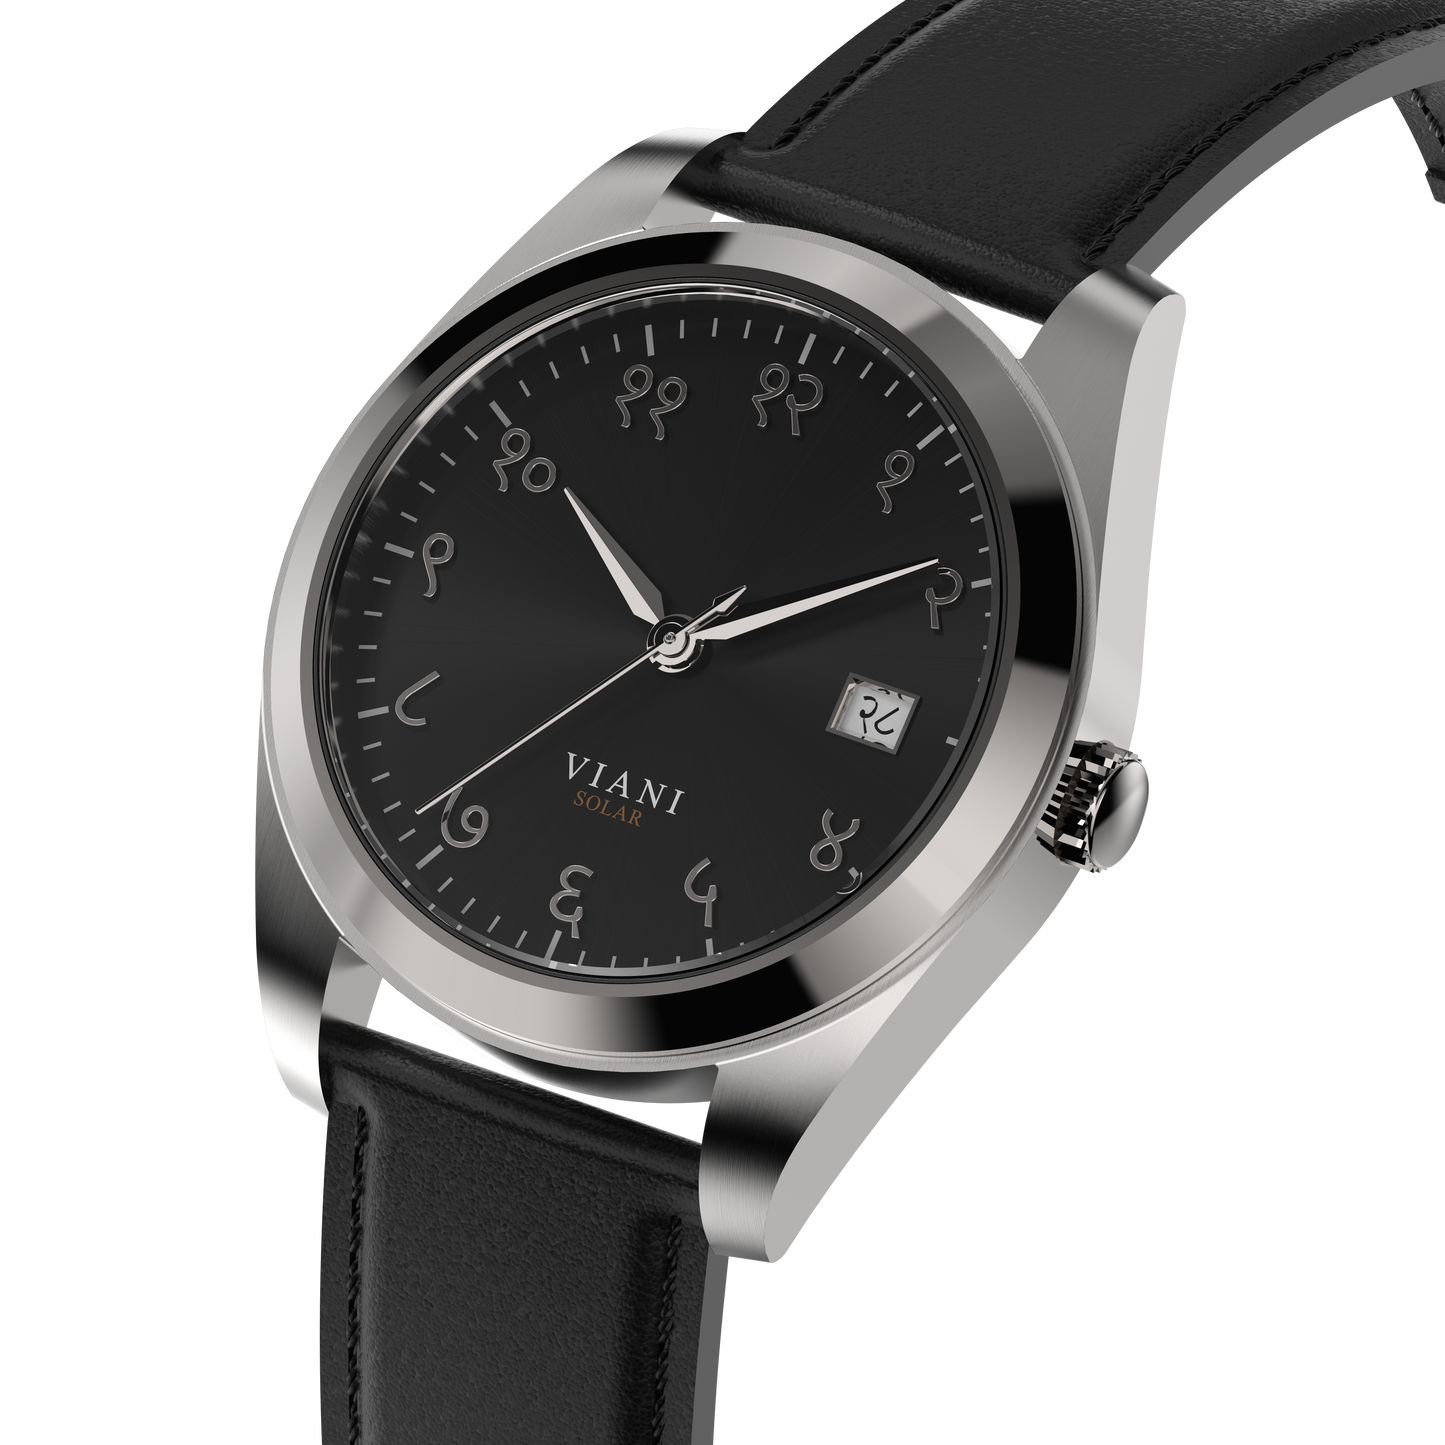 VIANI Watch Company Hindi Numeral,  Midnight Black Sunray Dial Face . SilverHour Minute and Second Hands, Hindi Numeral Date Wheel, Solar Movement, Black Full Grain Leather Strap